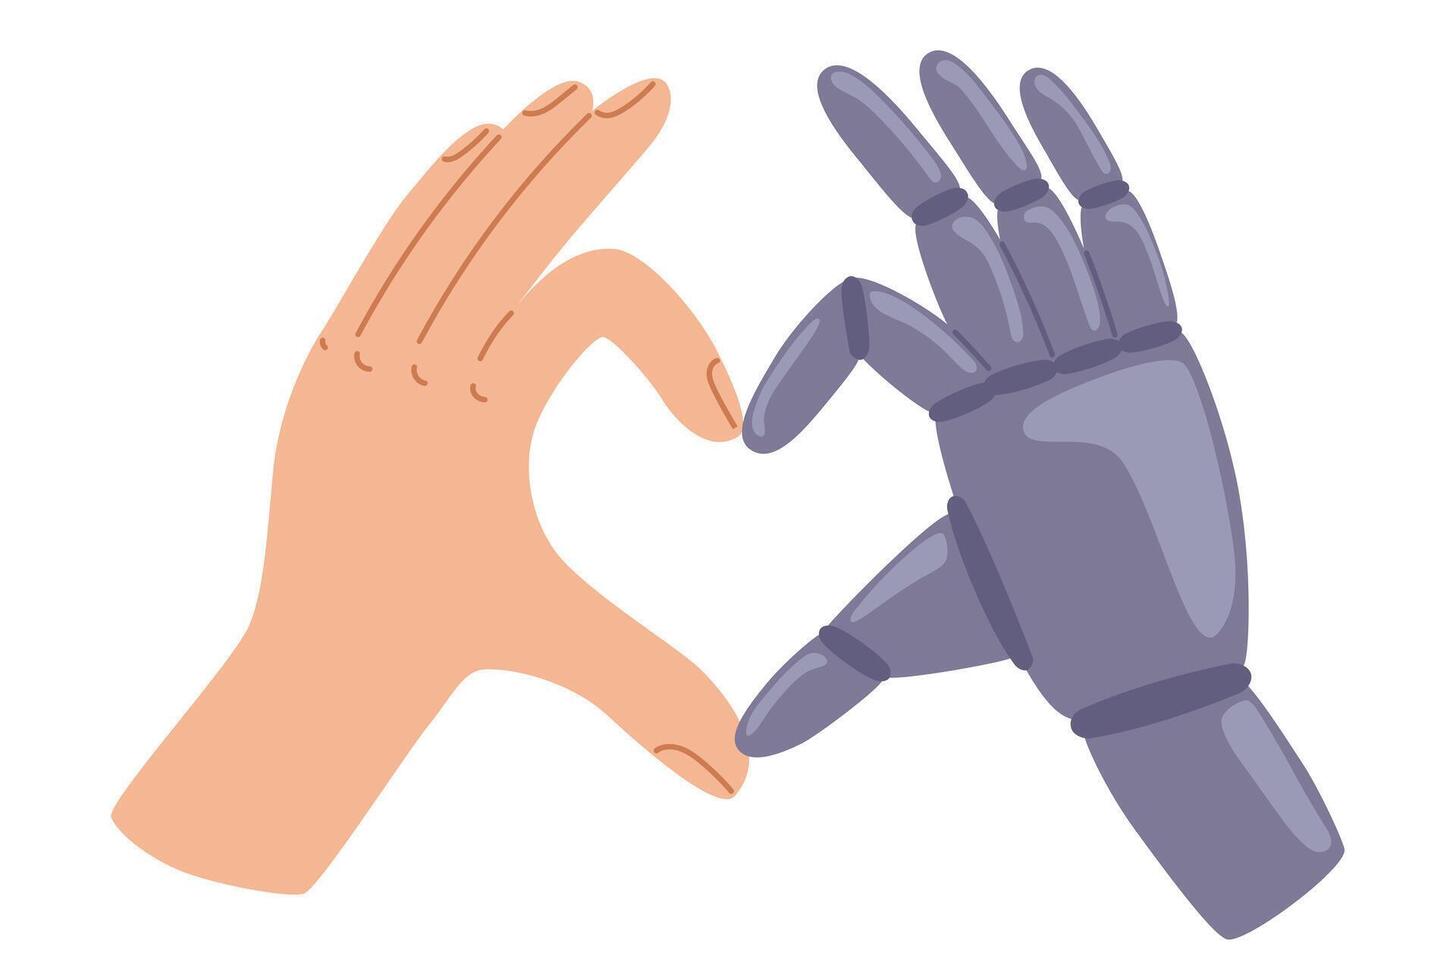 Heart human and robot hands gesture. Collaboration between humans and robots. Artificial intelligence evolution and interaction with human processes. Vector illustration in hand drawn style